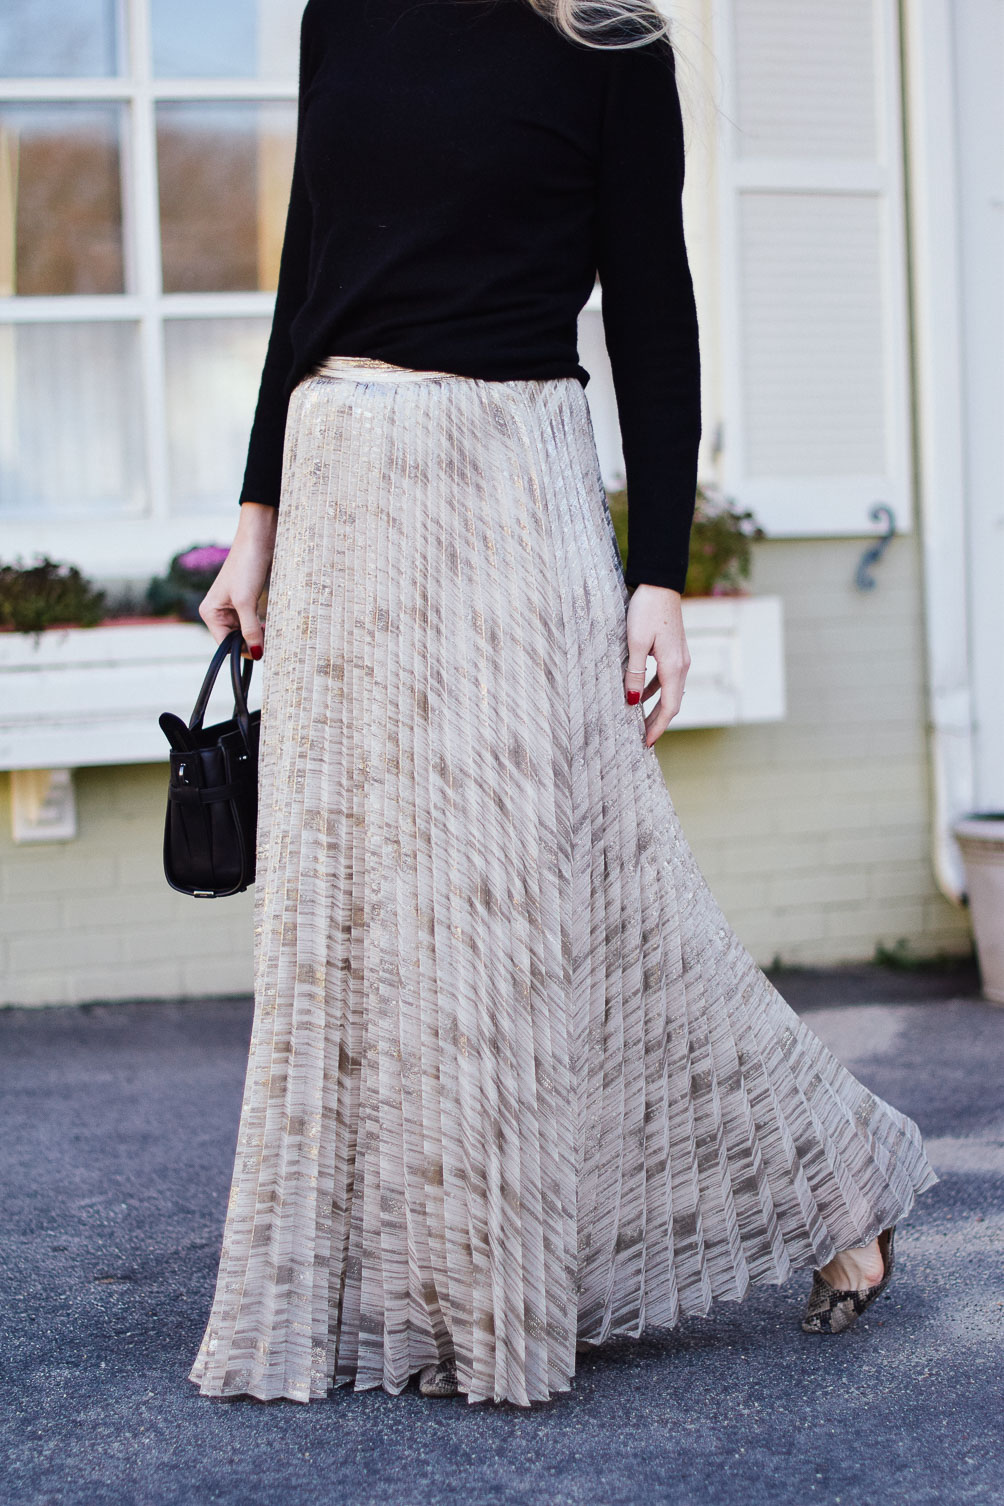 styling a metallic maxi skirt with snakeskin flats and cozy cashmere sweater